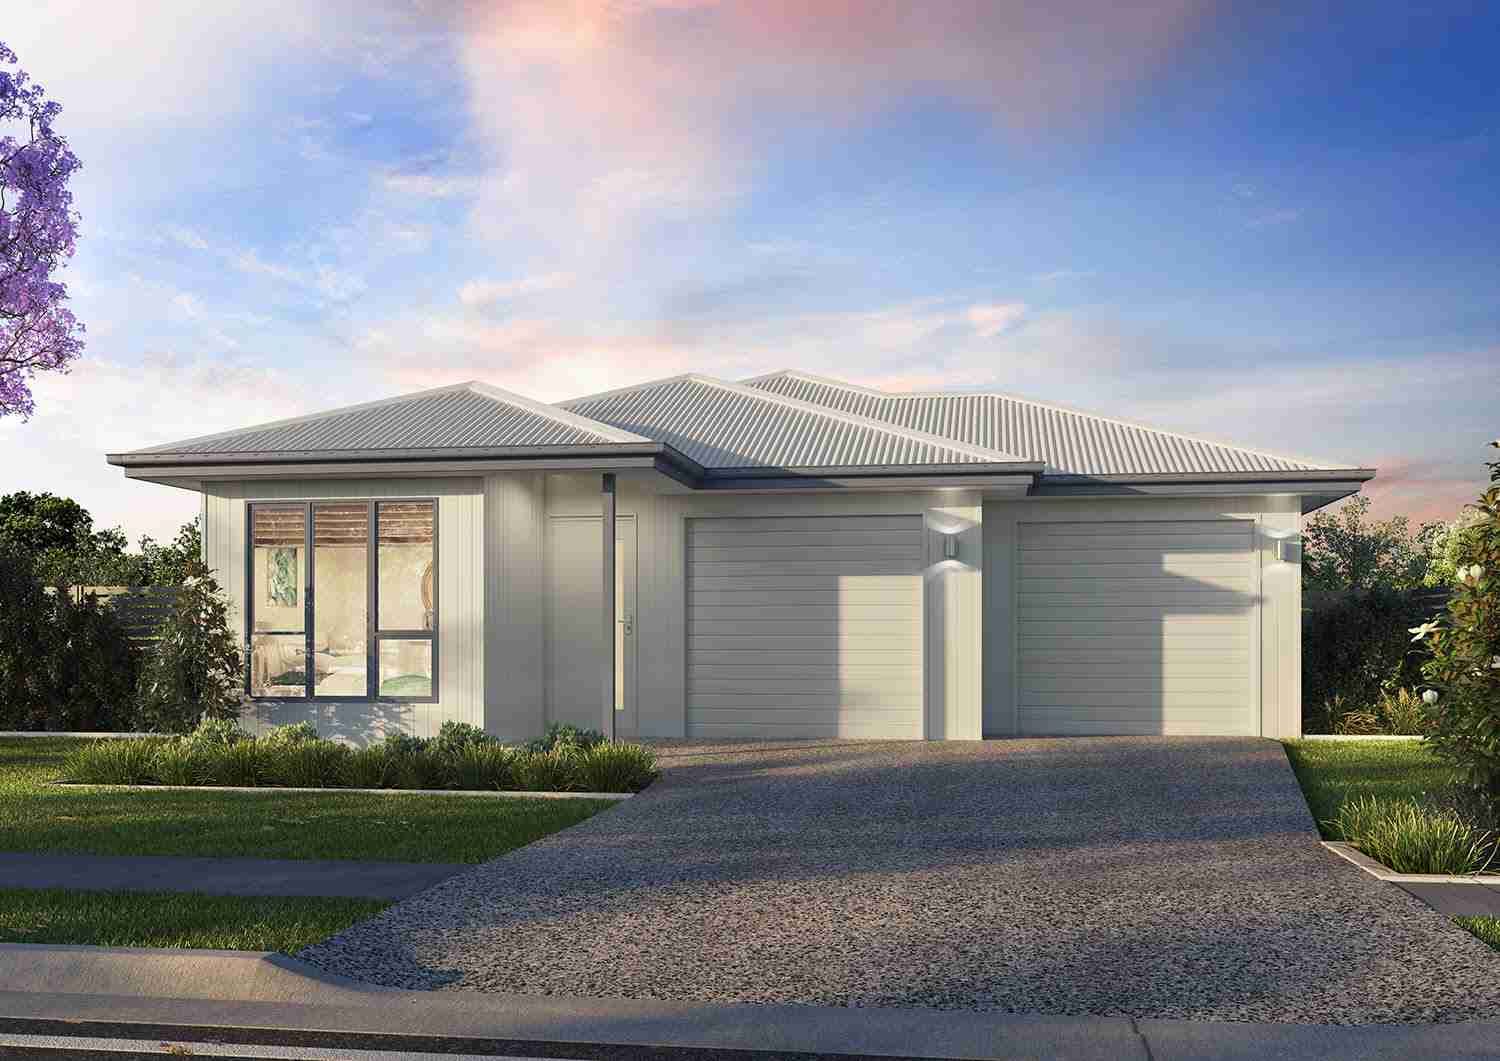 5 bedrooms New House & Land in  BALDIVIS WA, 6171